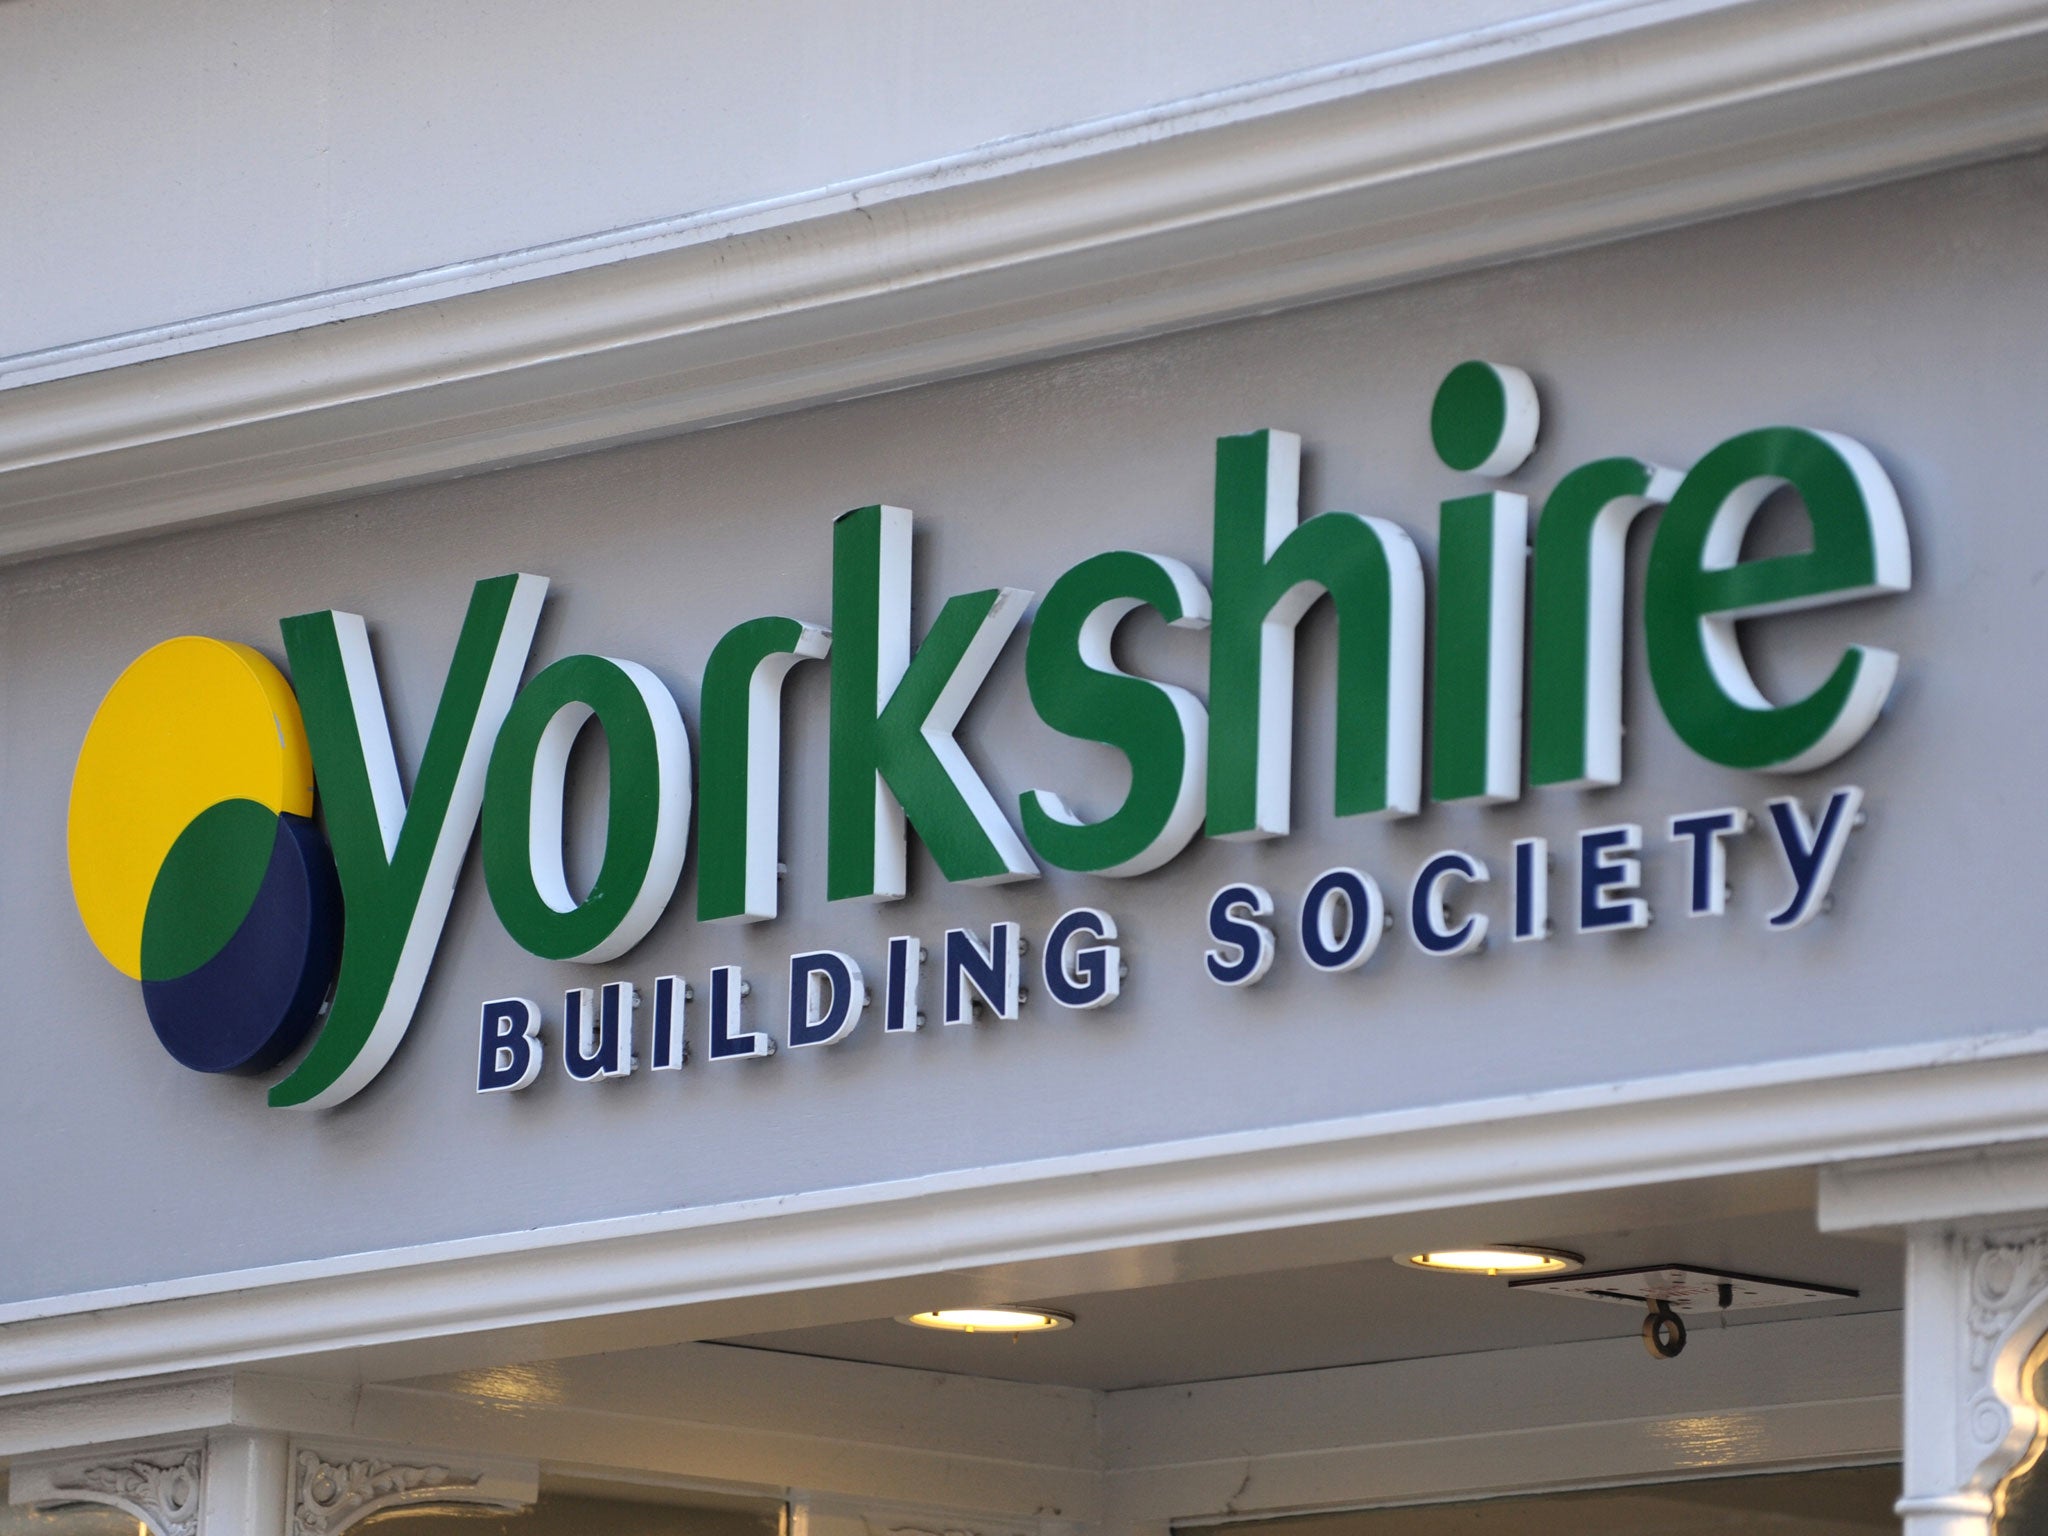 The Yorkshire is one of the market's main players